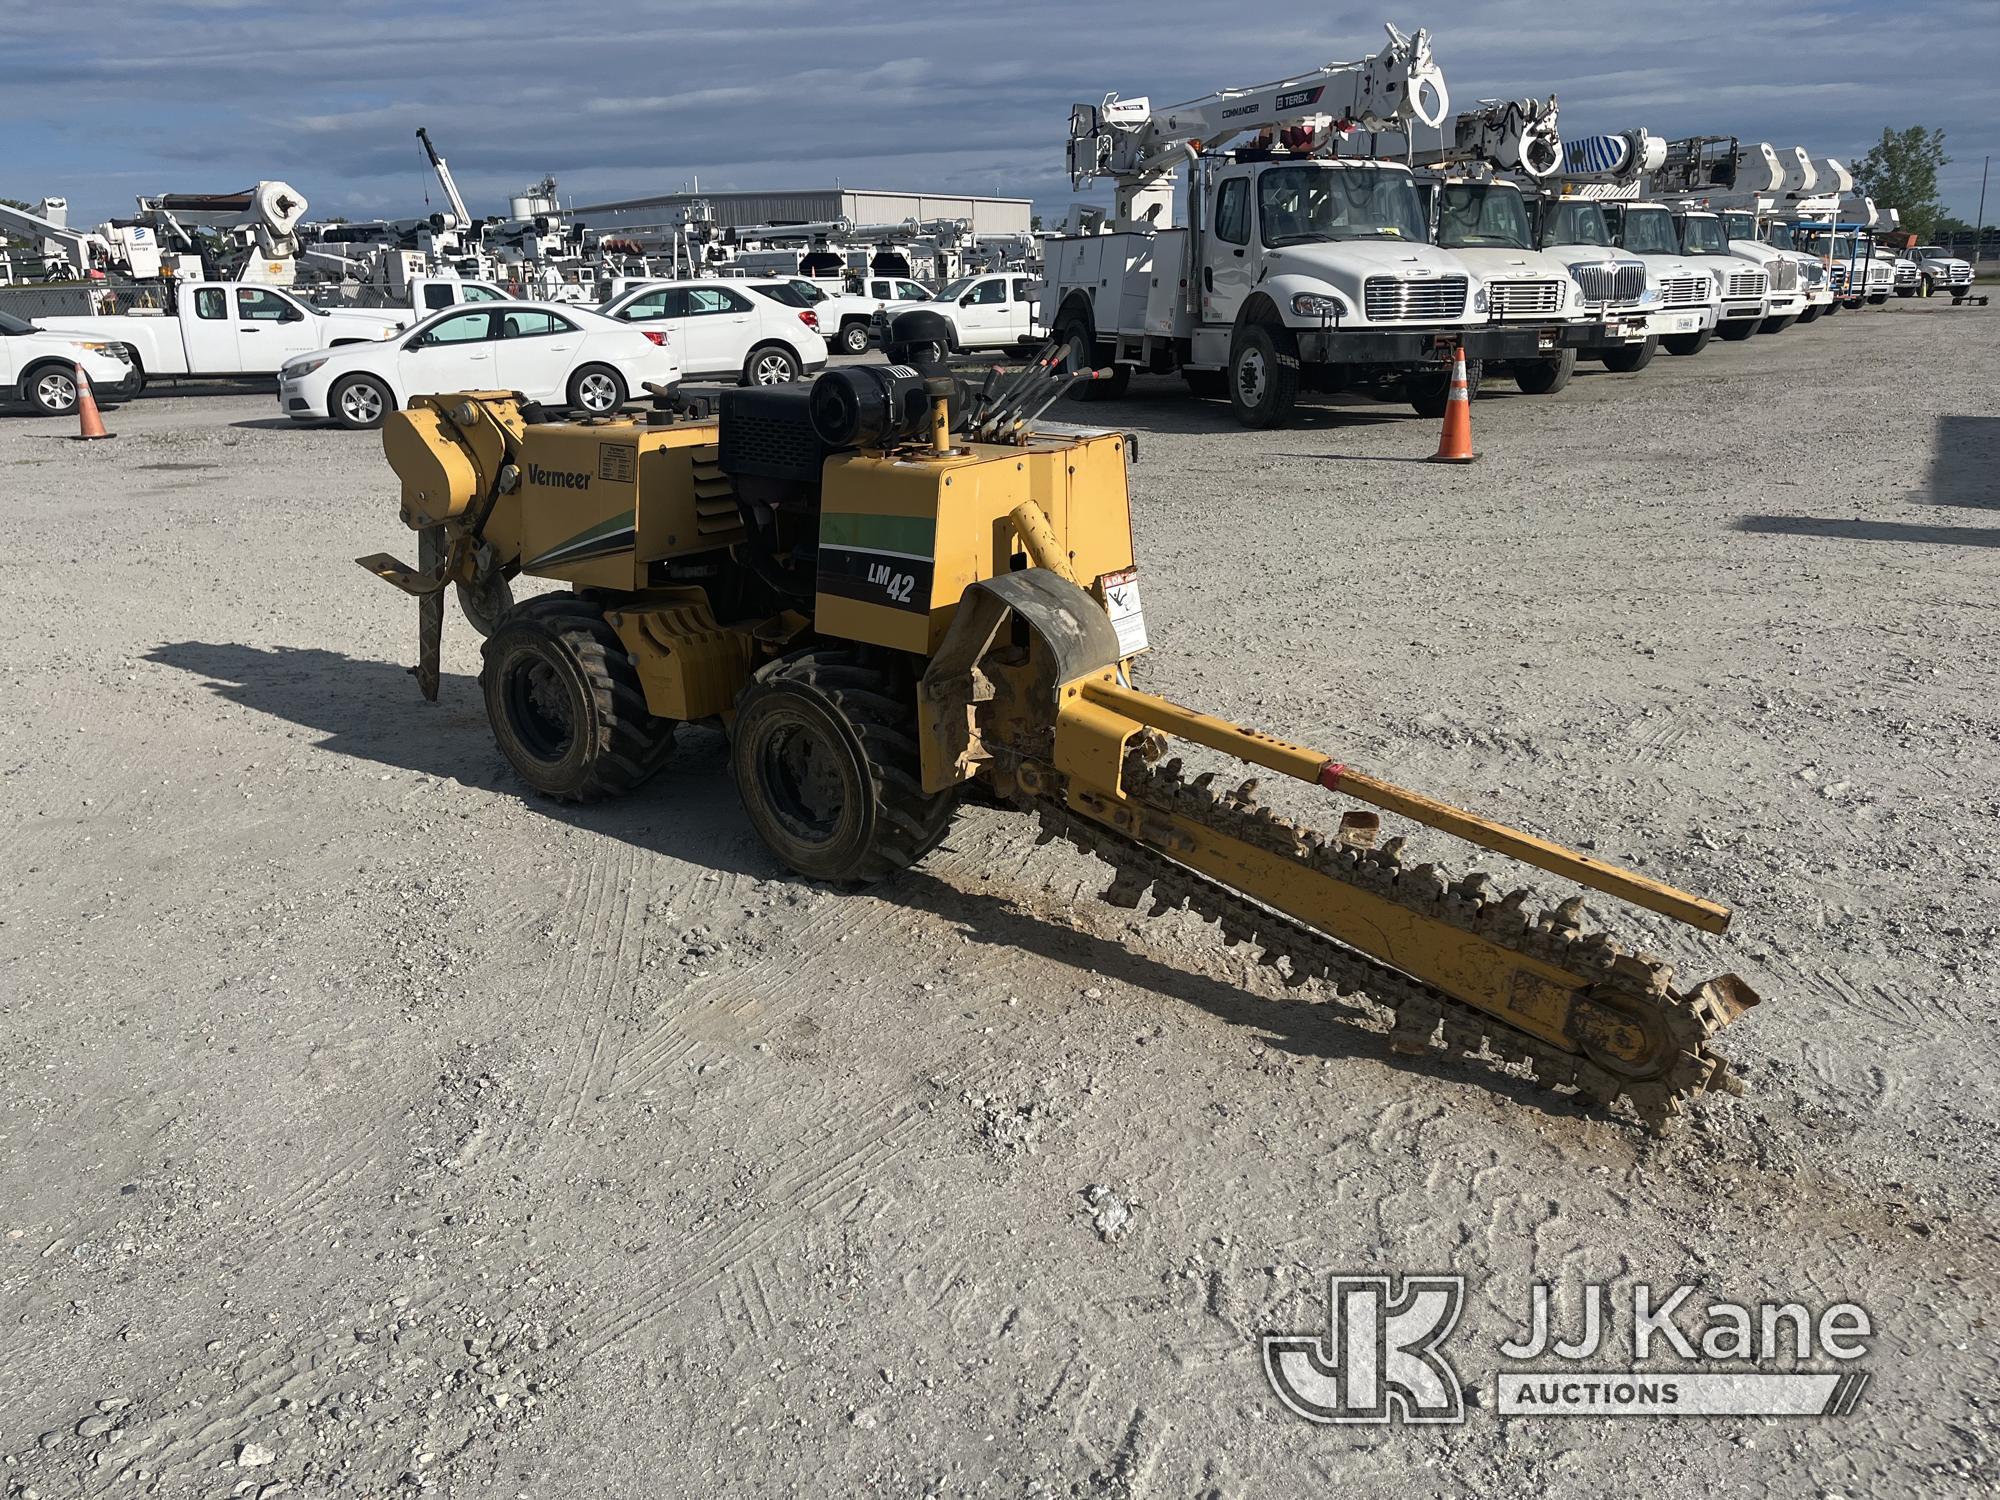 (Chester, VA) 2008 Vermeer LM42 Walk Beside Articulating Combo Trencher/Vibratory Cable Plow Operate